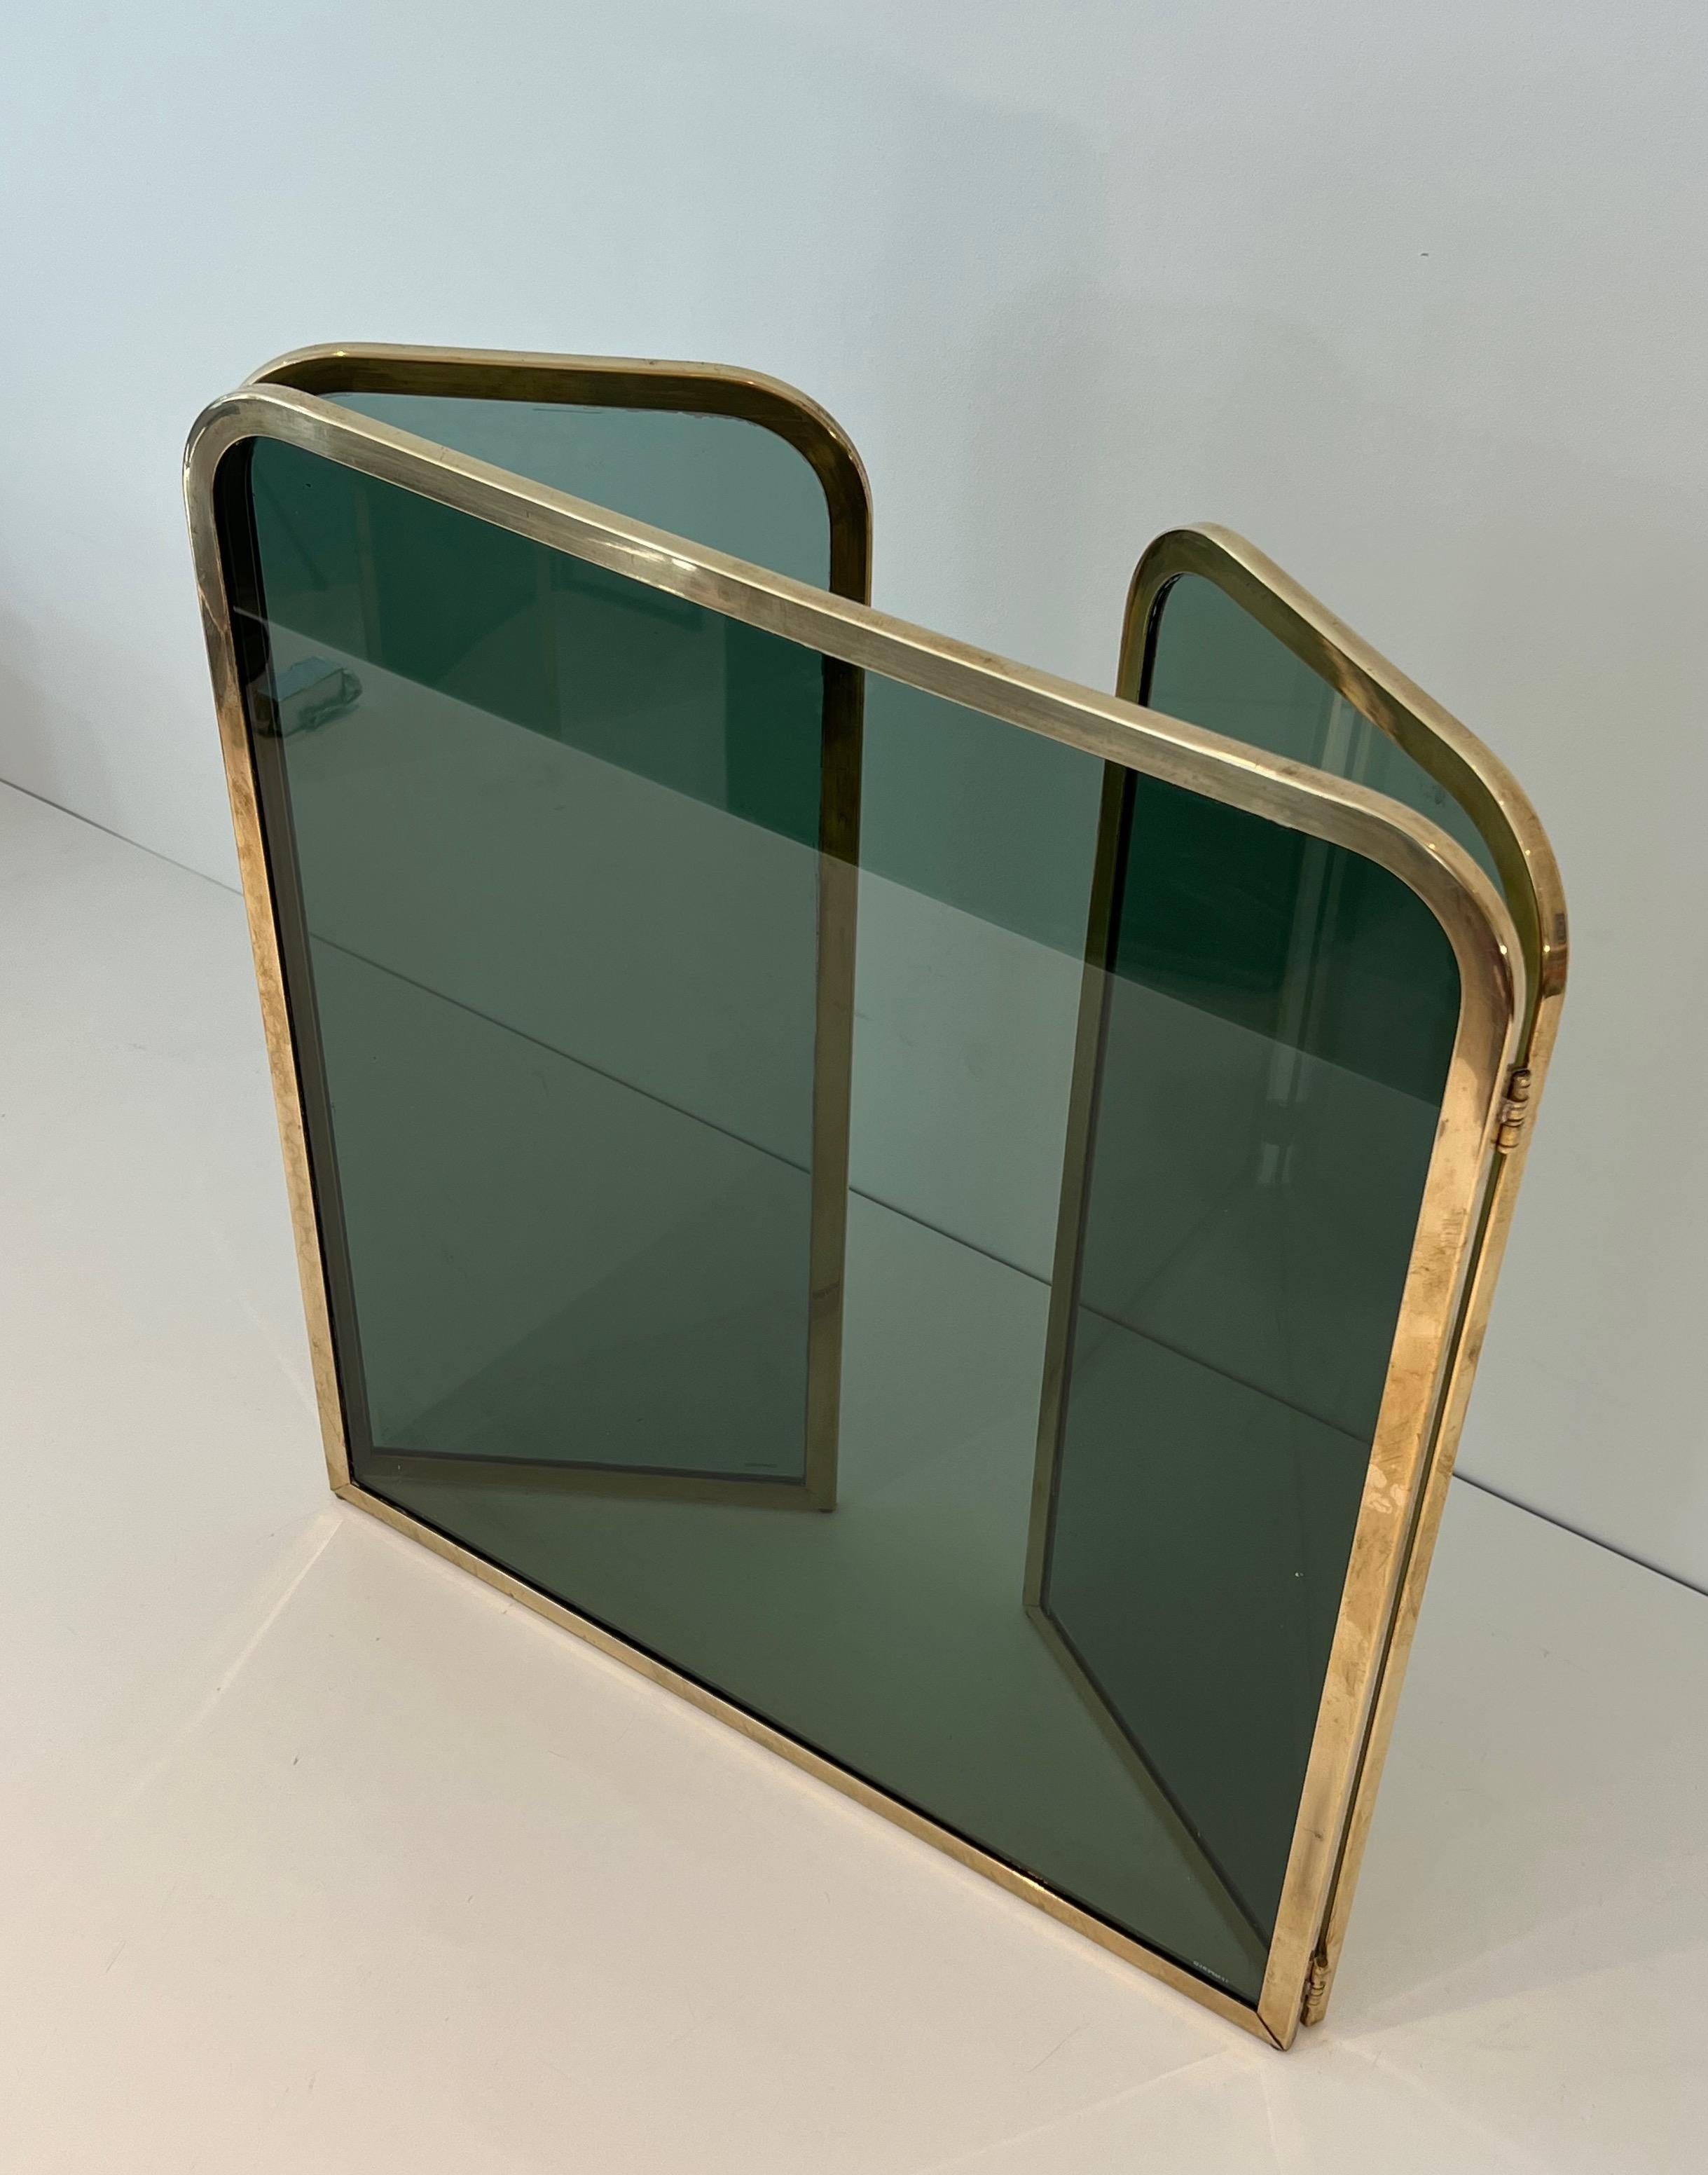 Fireplace Screen Made of 3 Greenish Glass Panels Surrounded by a Brass Frame For Sale 4